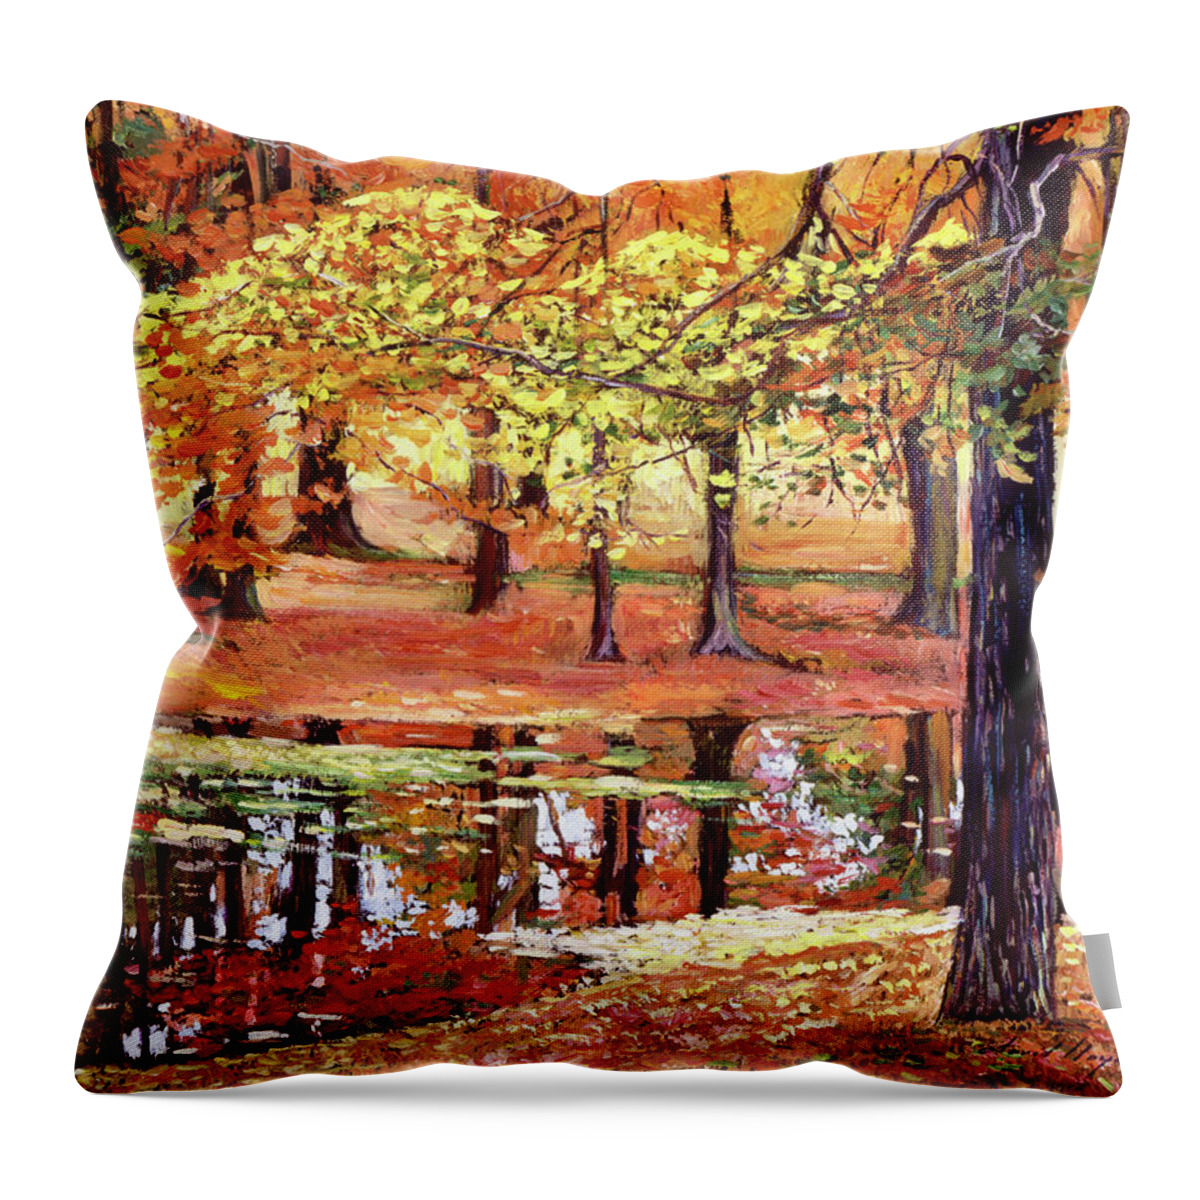 Impressionist Throw Pillow featuring the painting After The Rain #1 by David Lloyd Glover